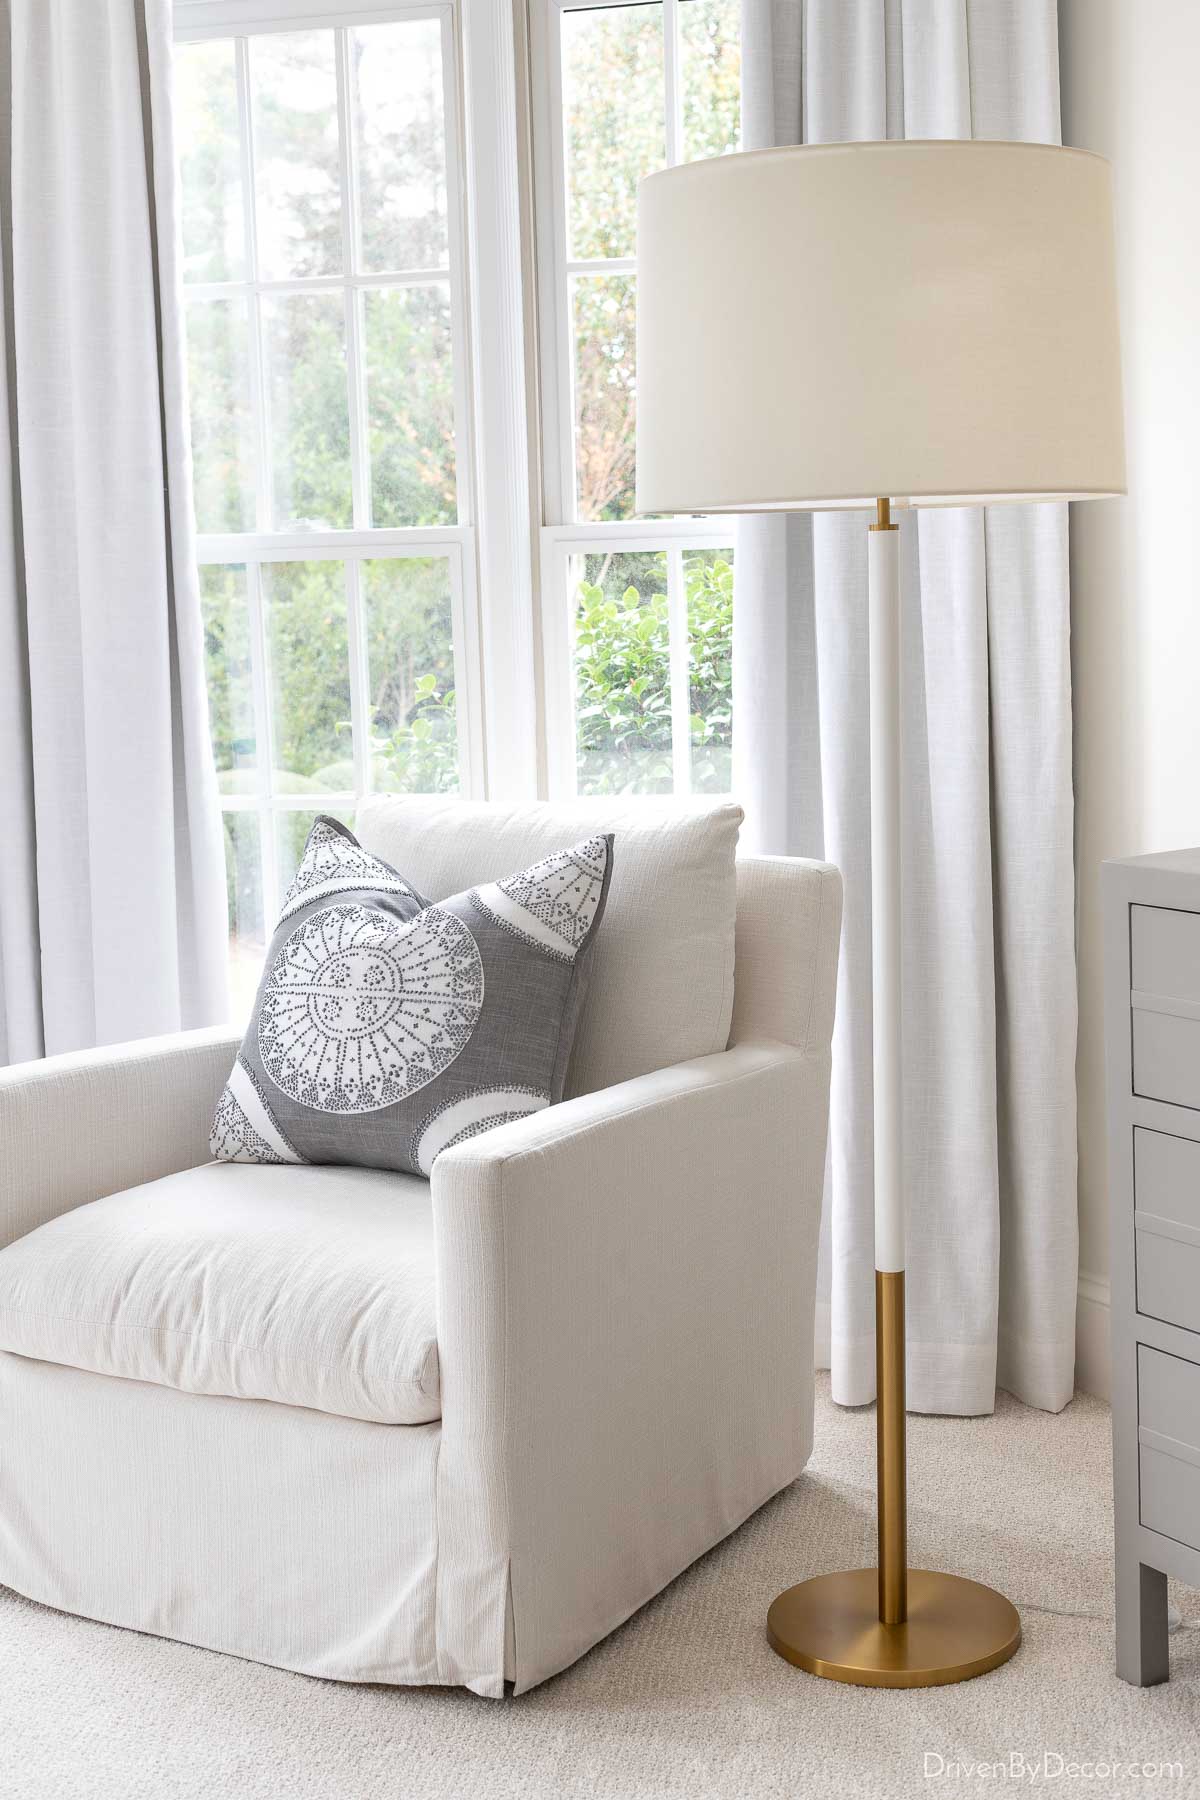 Brass & white bedroom lamp next to reading chair